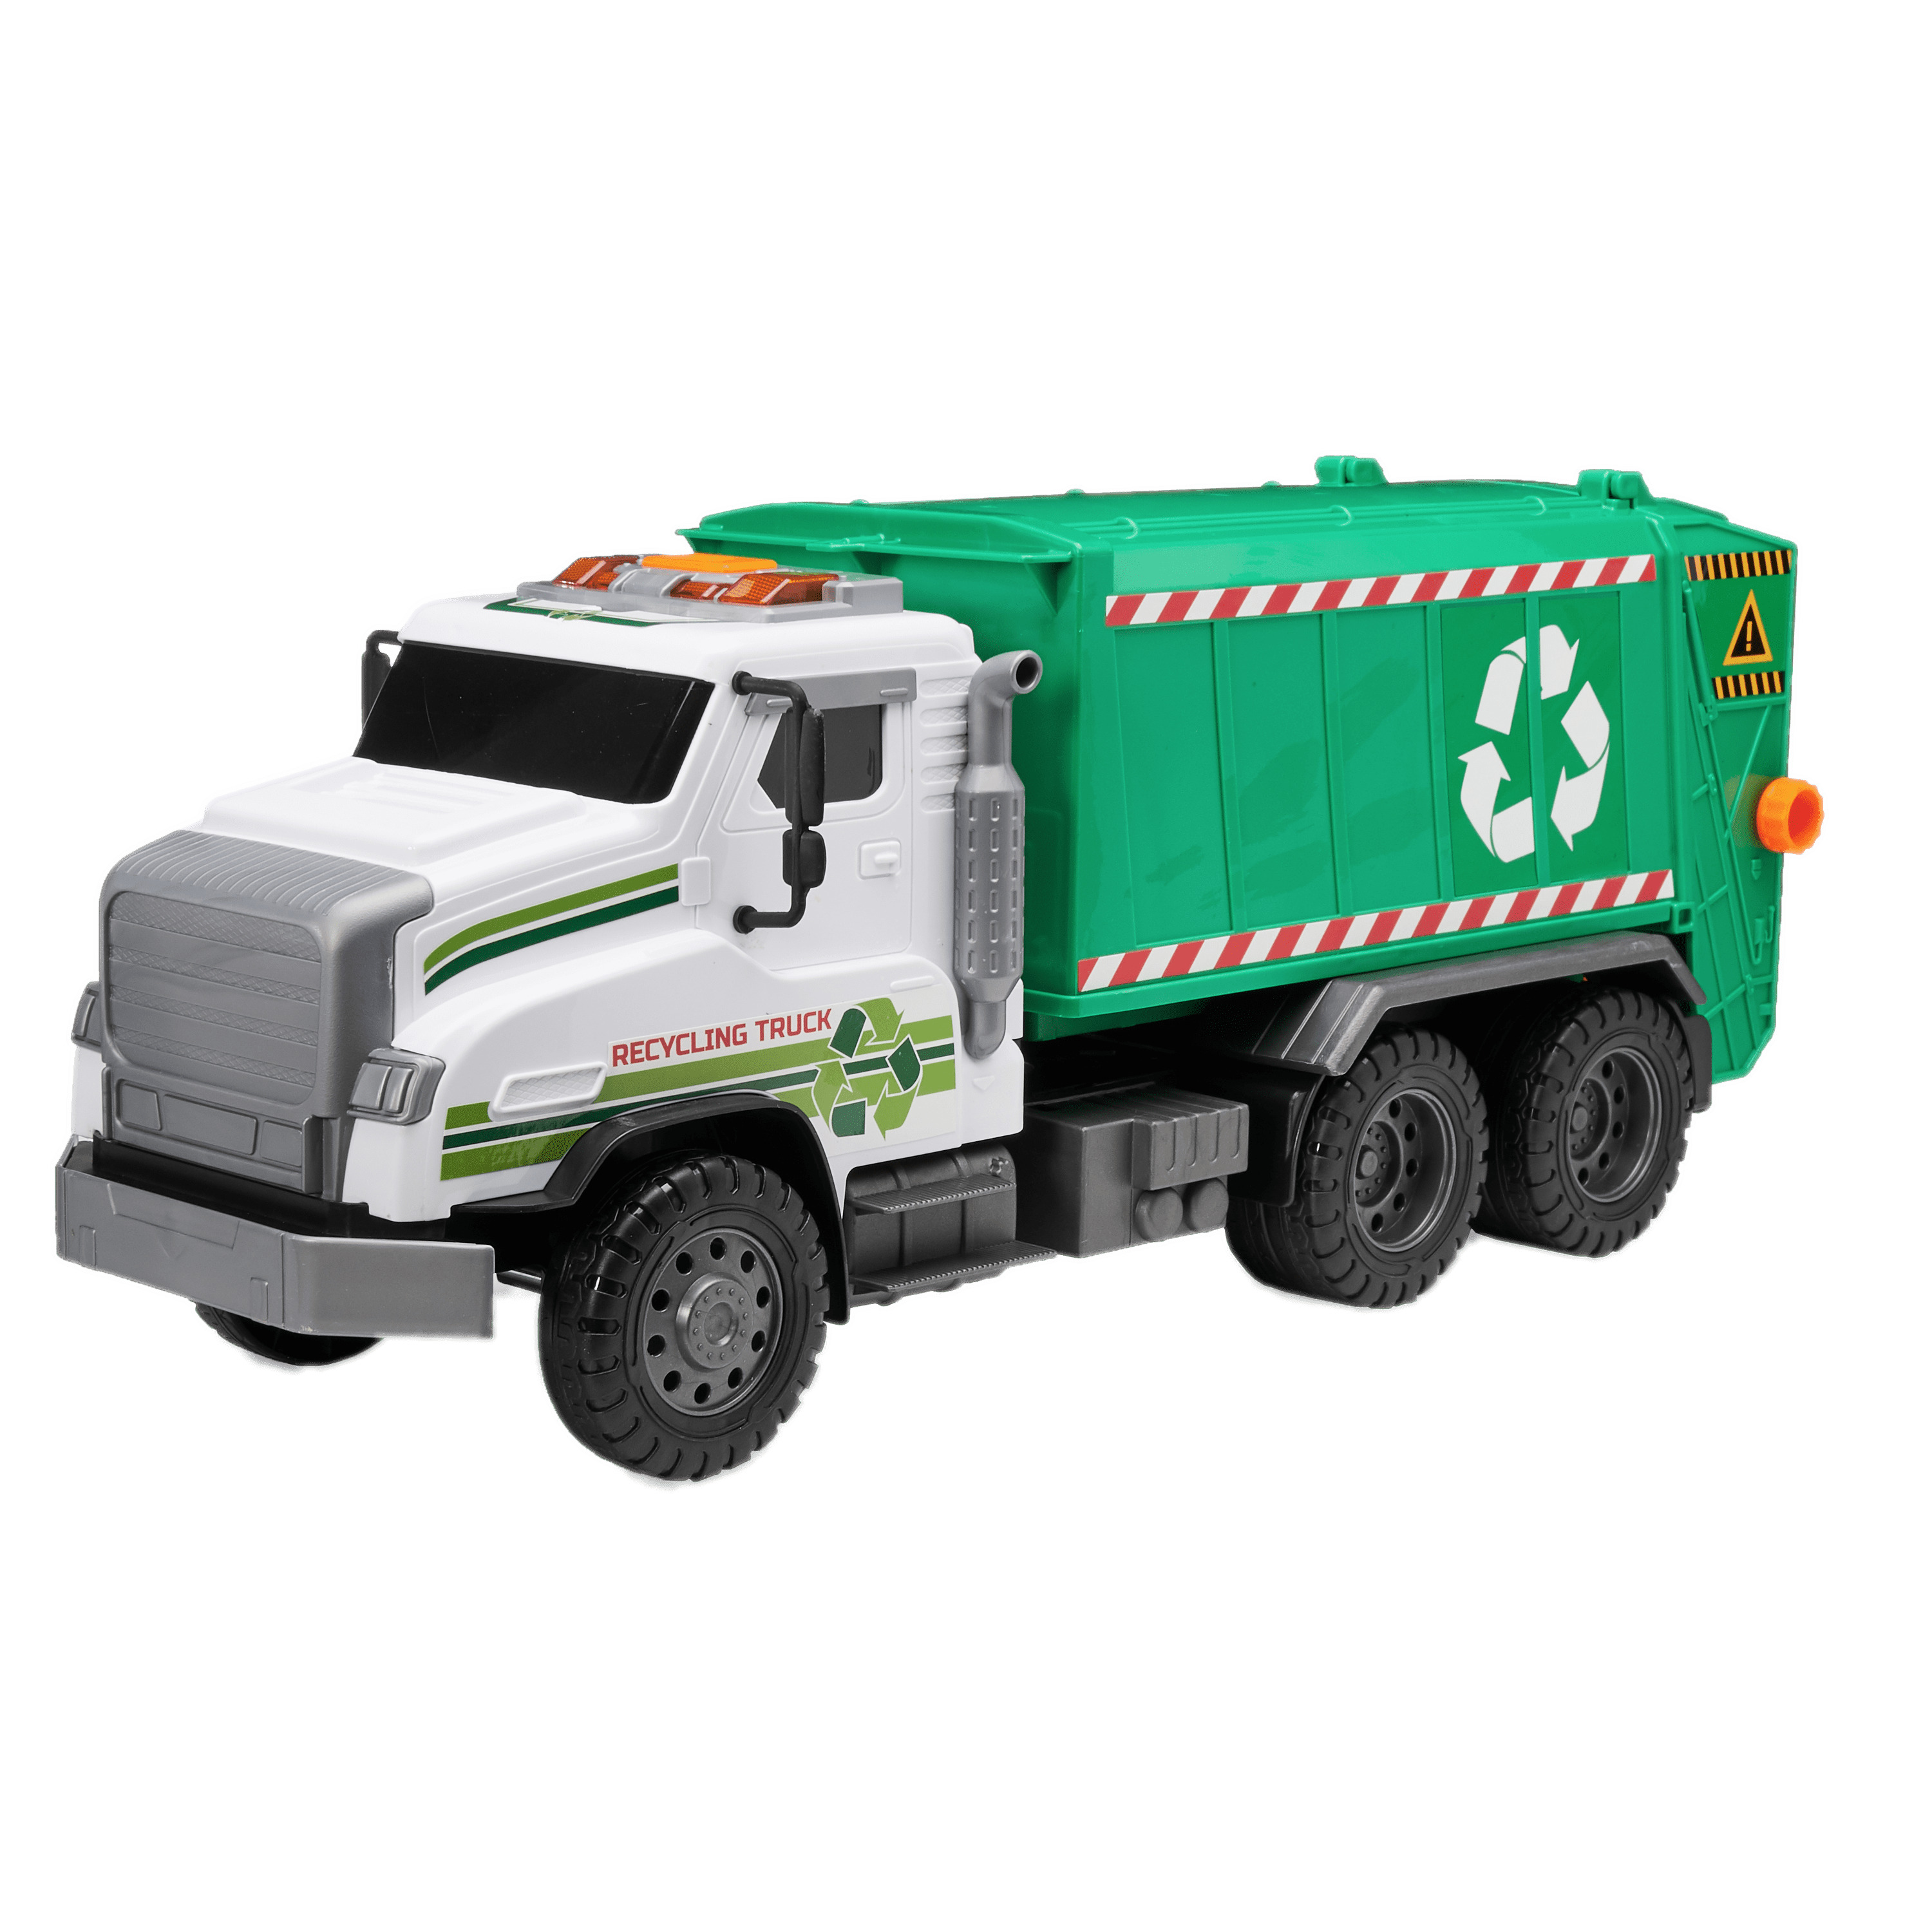 Toy Recycling Truck icons